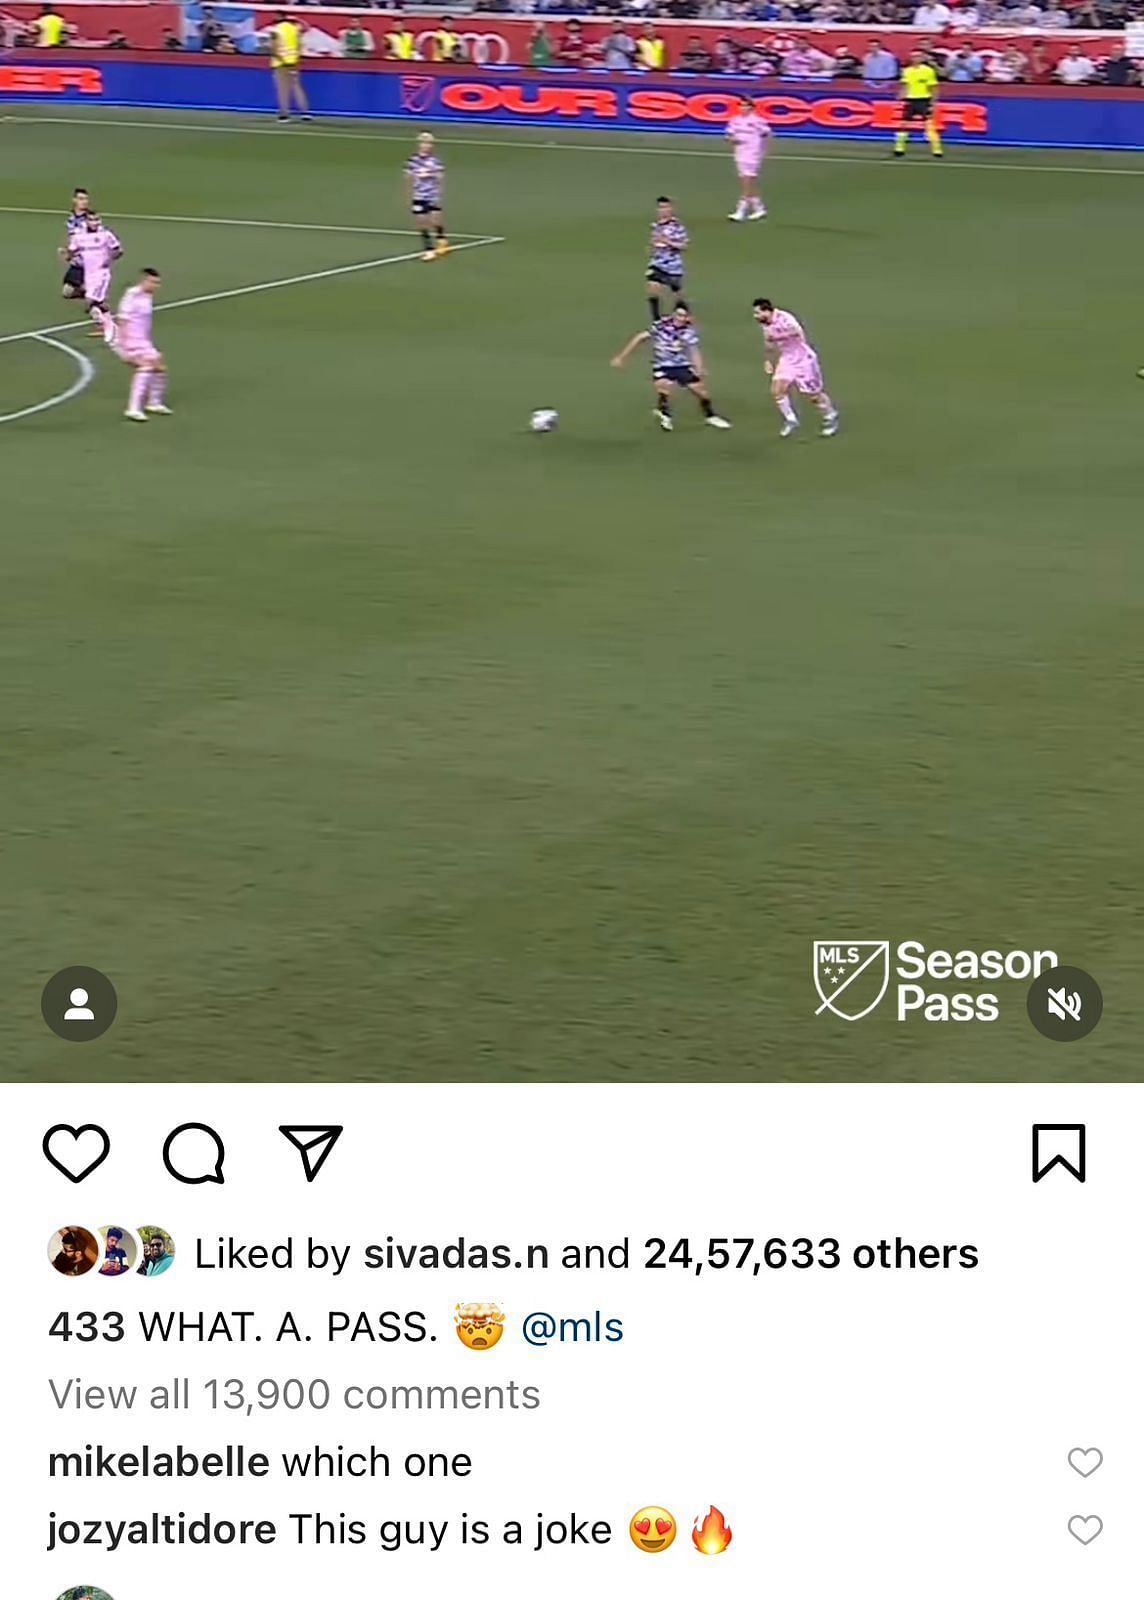 Jozy Altidore was clearly impressed by Lionel Messi&#039;s play